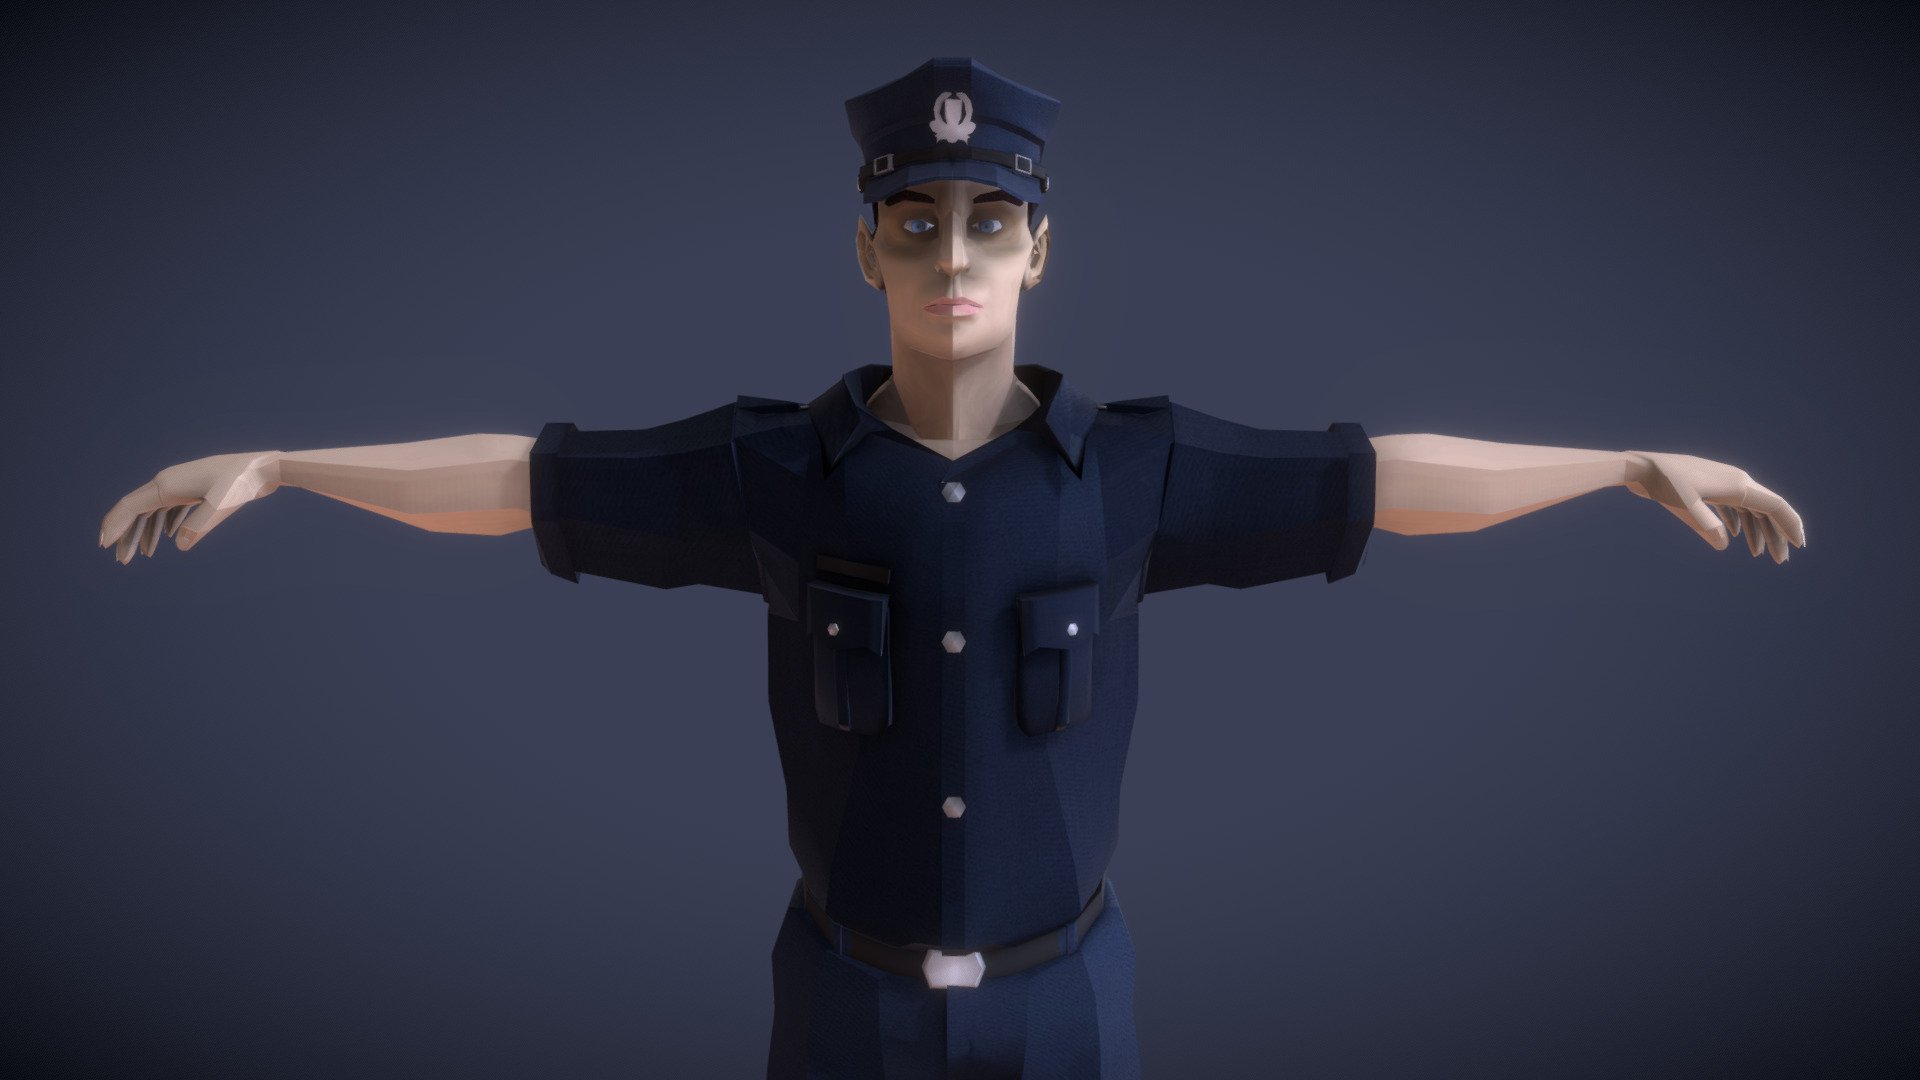 A Police Man model, base of a Singapore cop, created in class.
Created during my time in Nitec Digital Animation 3d model